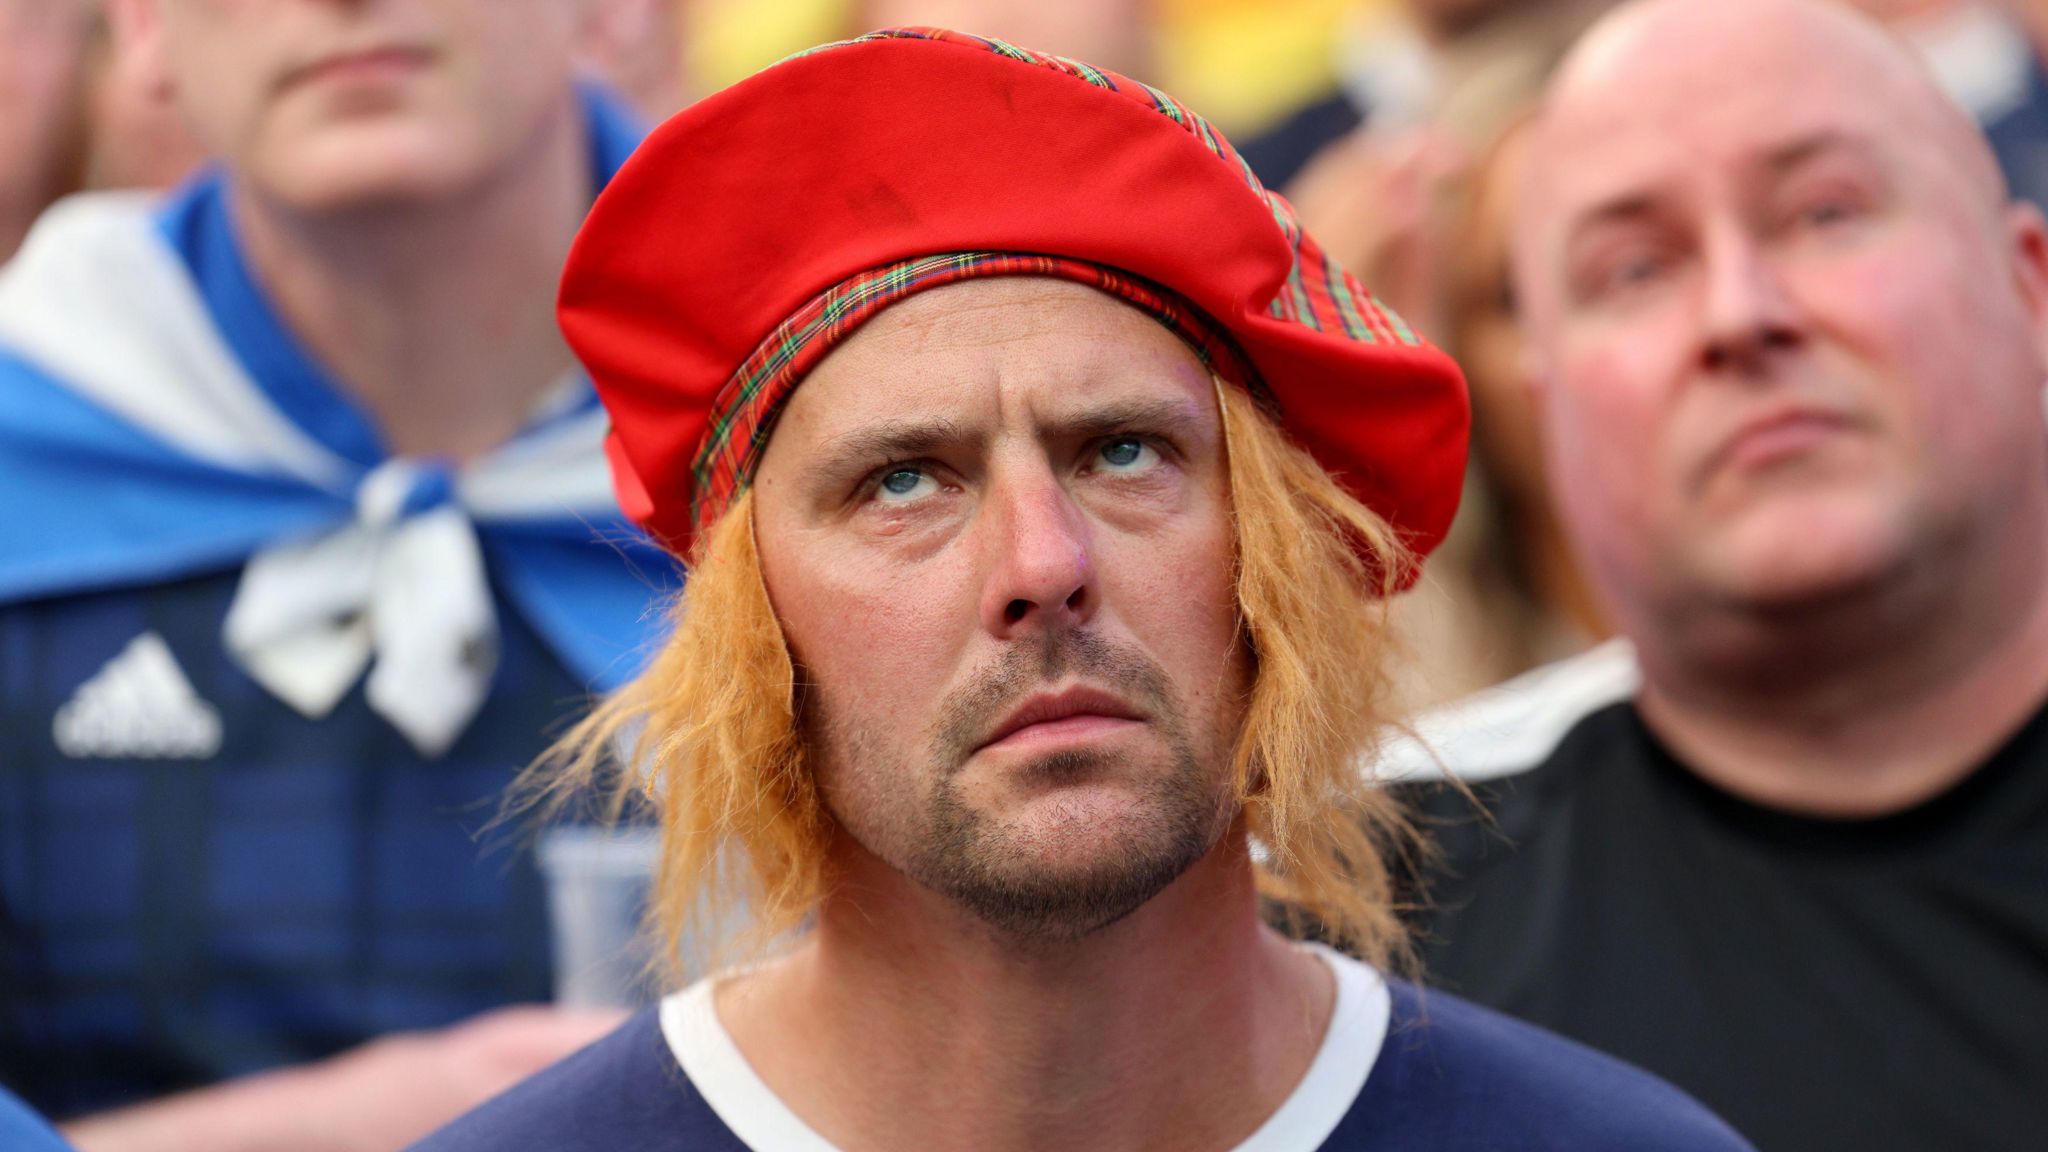 Scotland fans react during their defeat to Germany